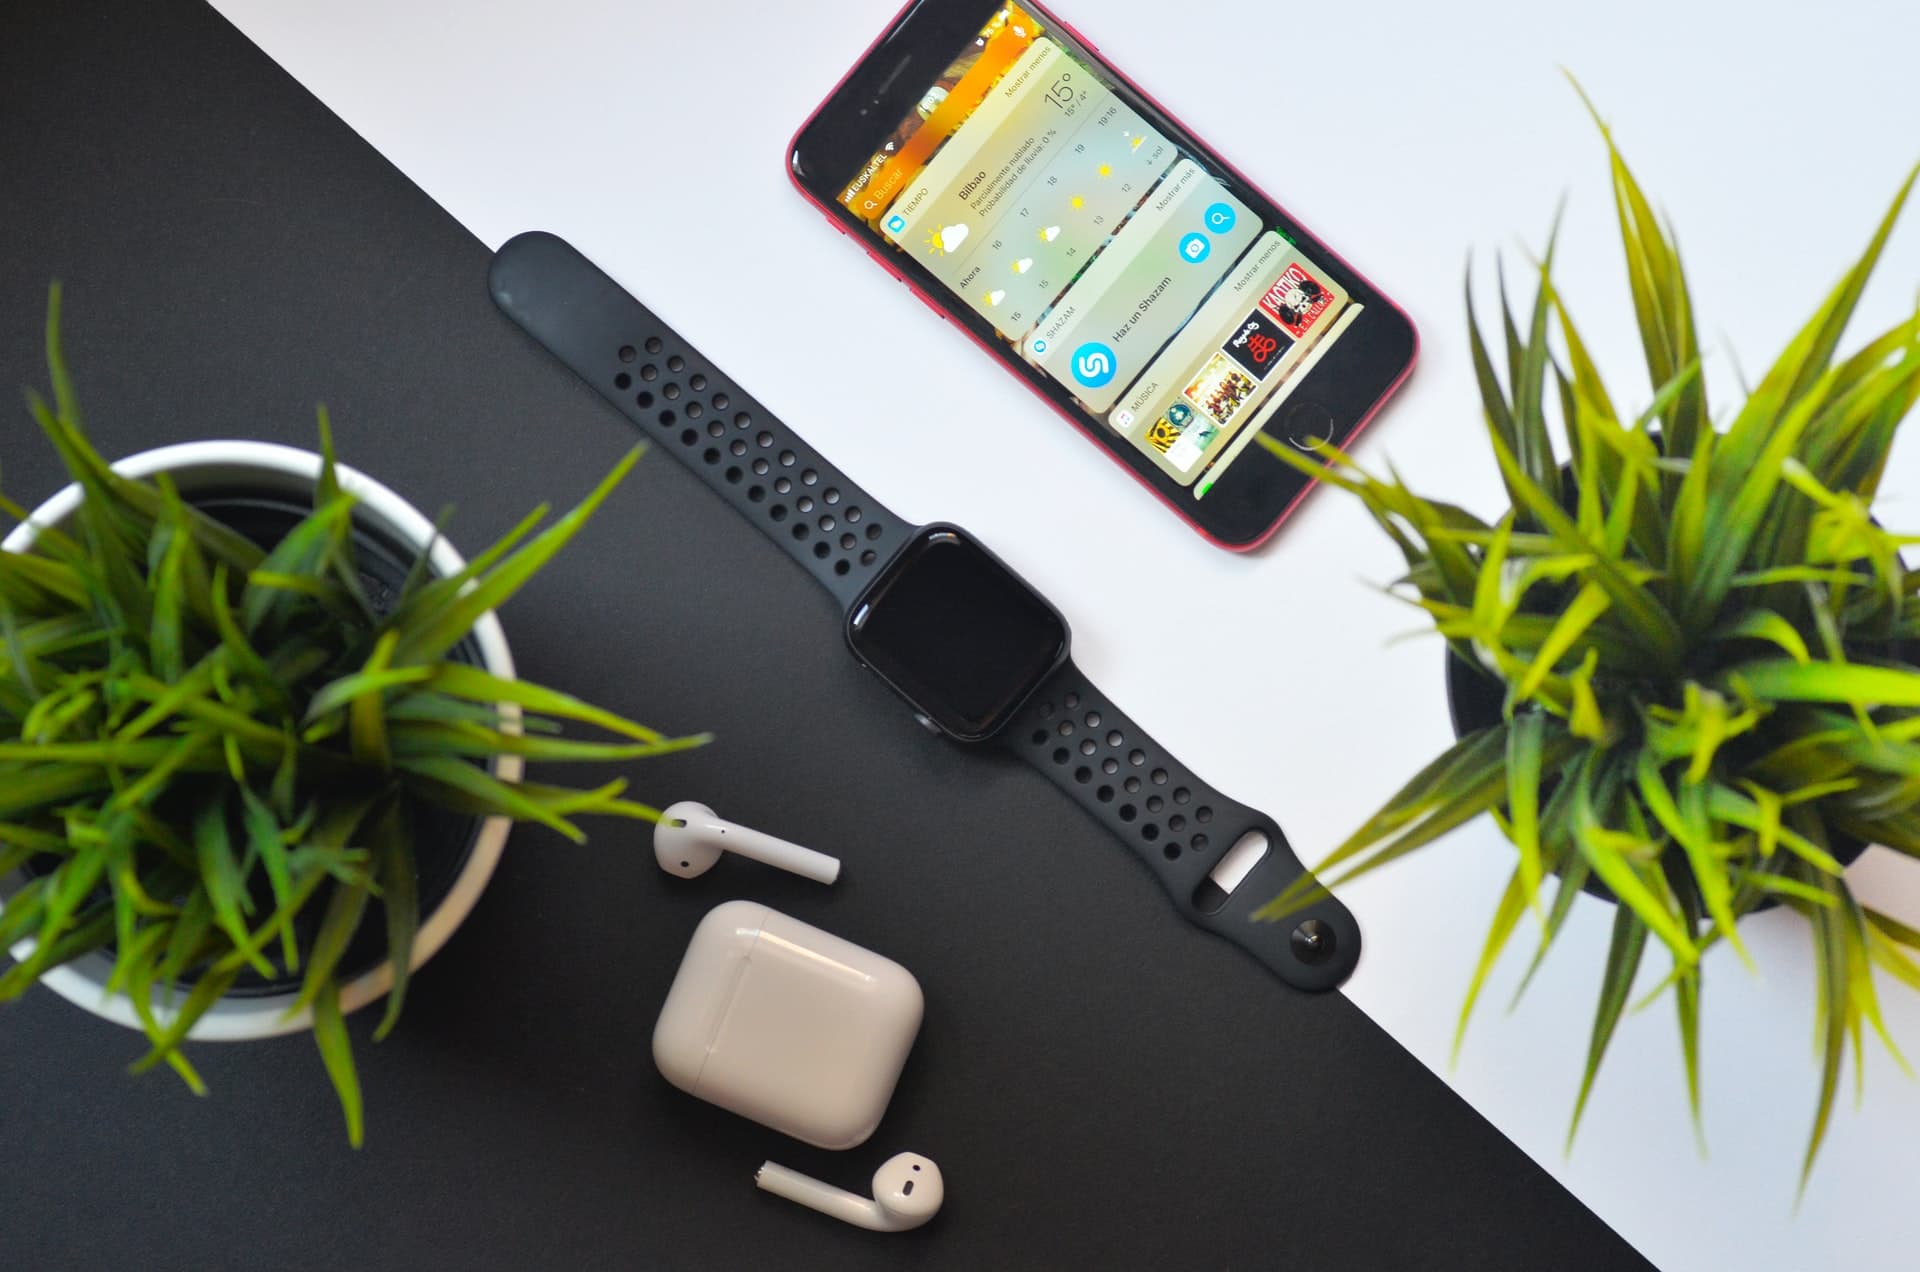 Apple Watch kept on a table with an iPhone and AirPods nearby